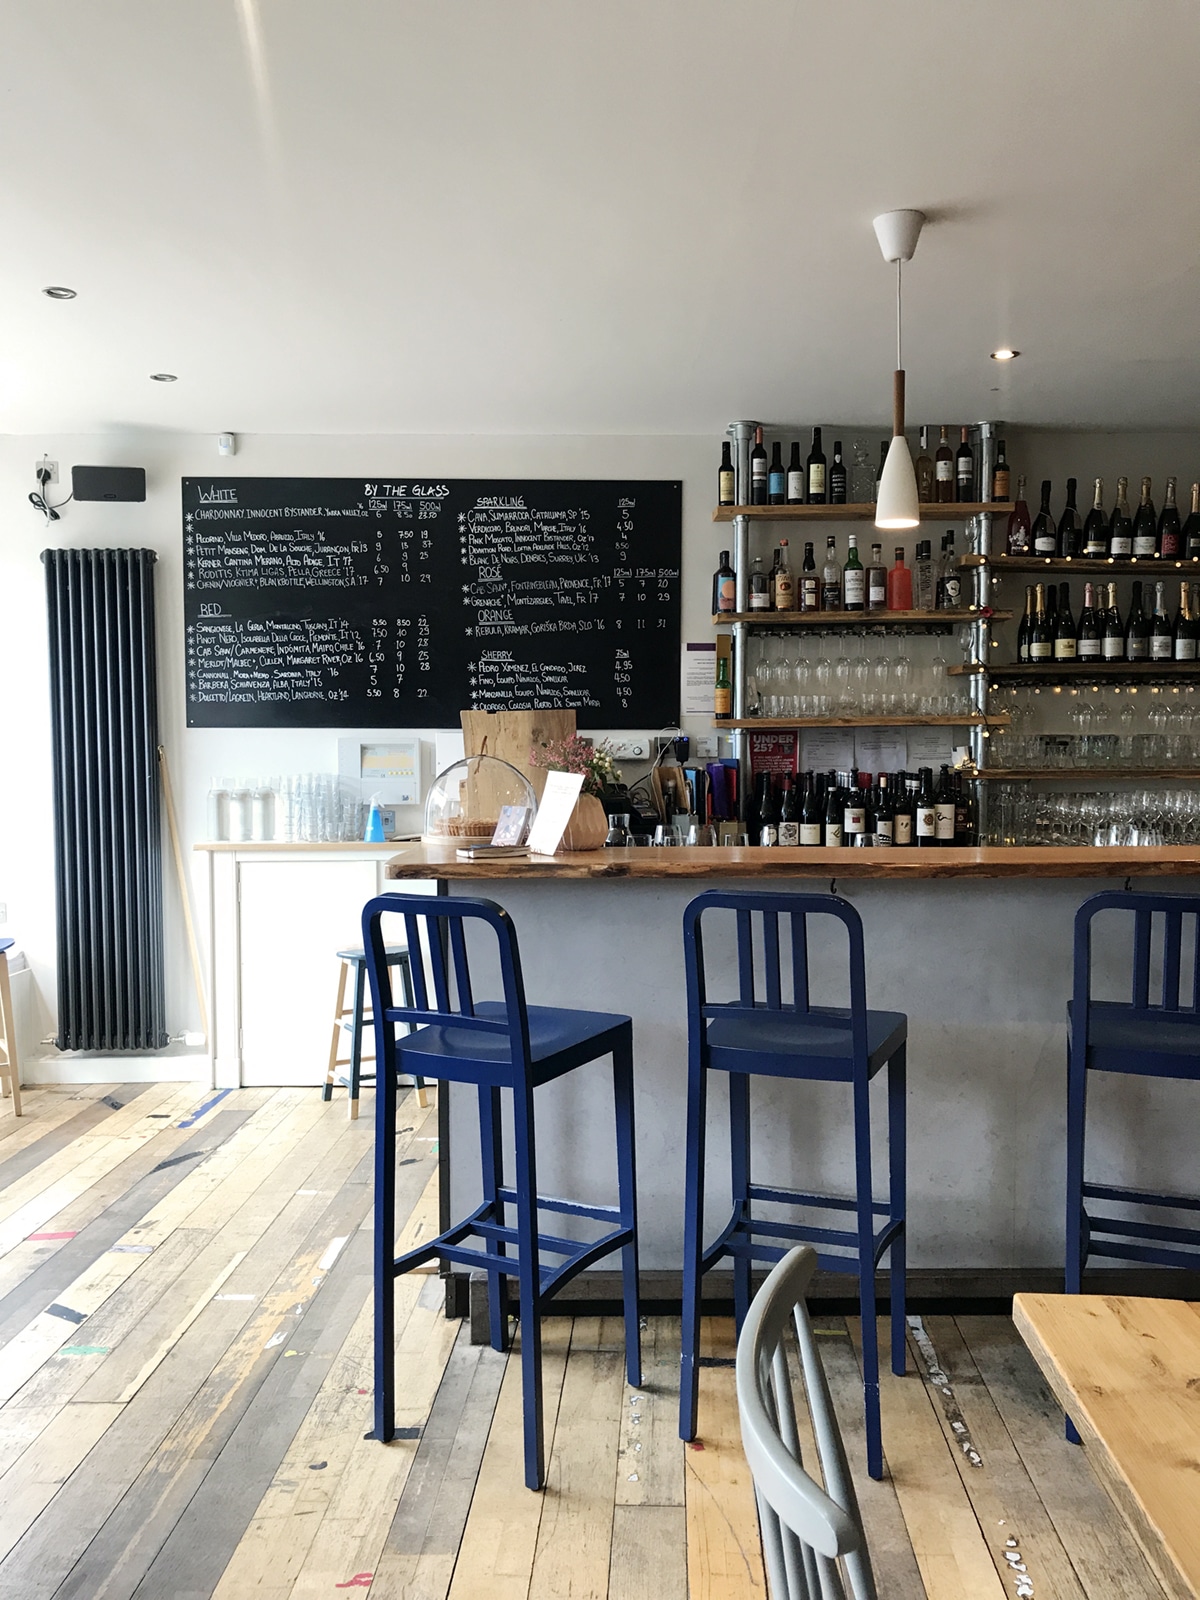 wine and charcuterie at smith and gertrude restaurant in stockbridge | edinburgh city guide on coco kelley